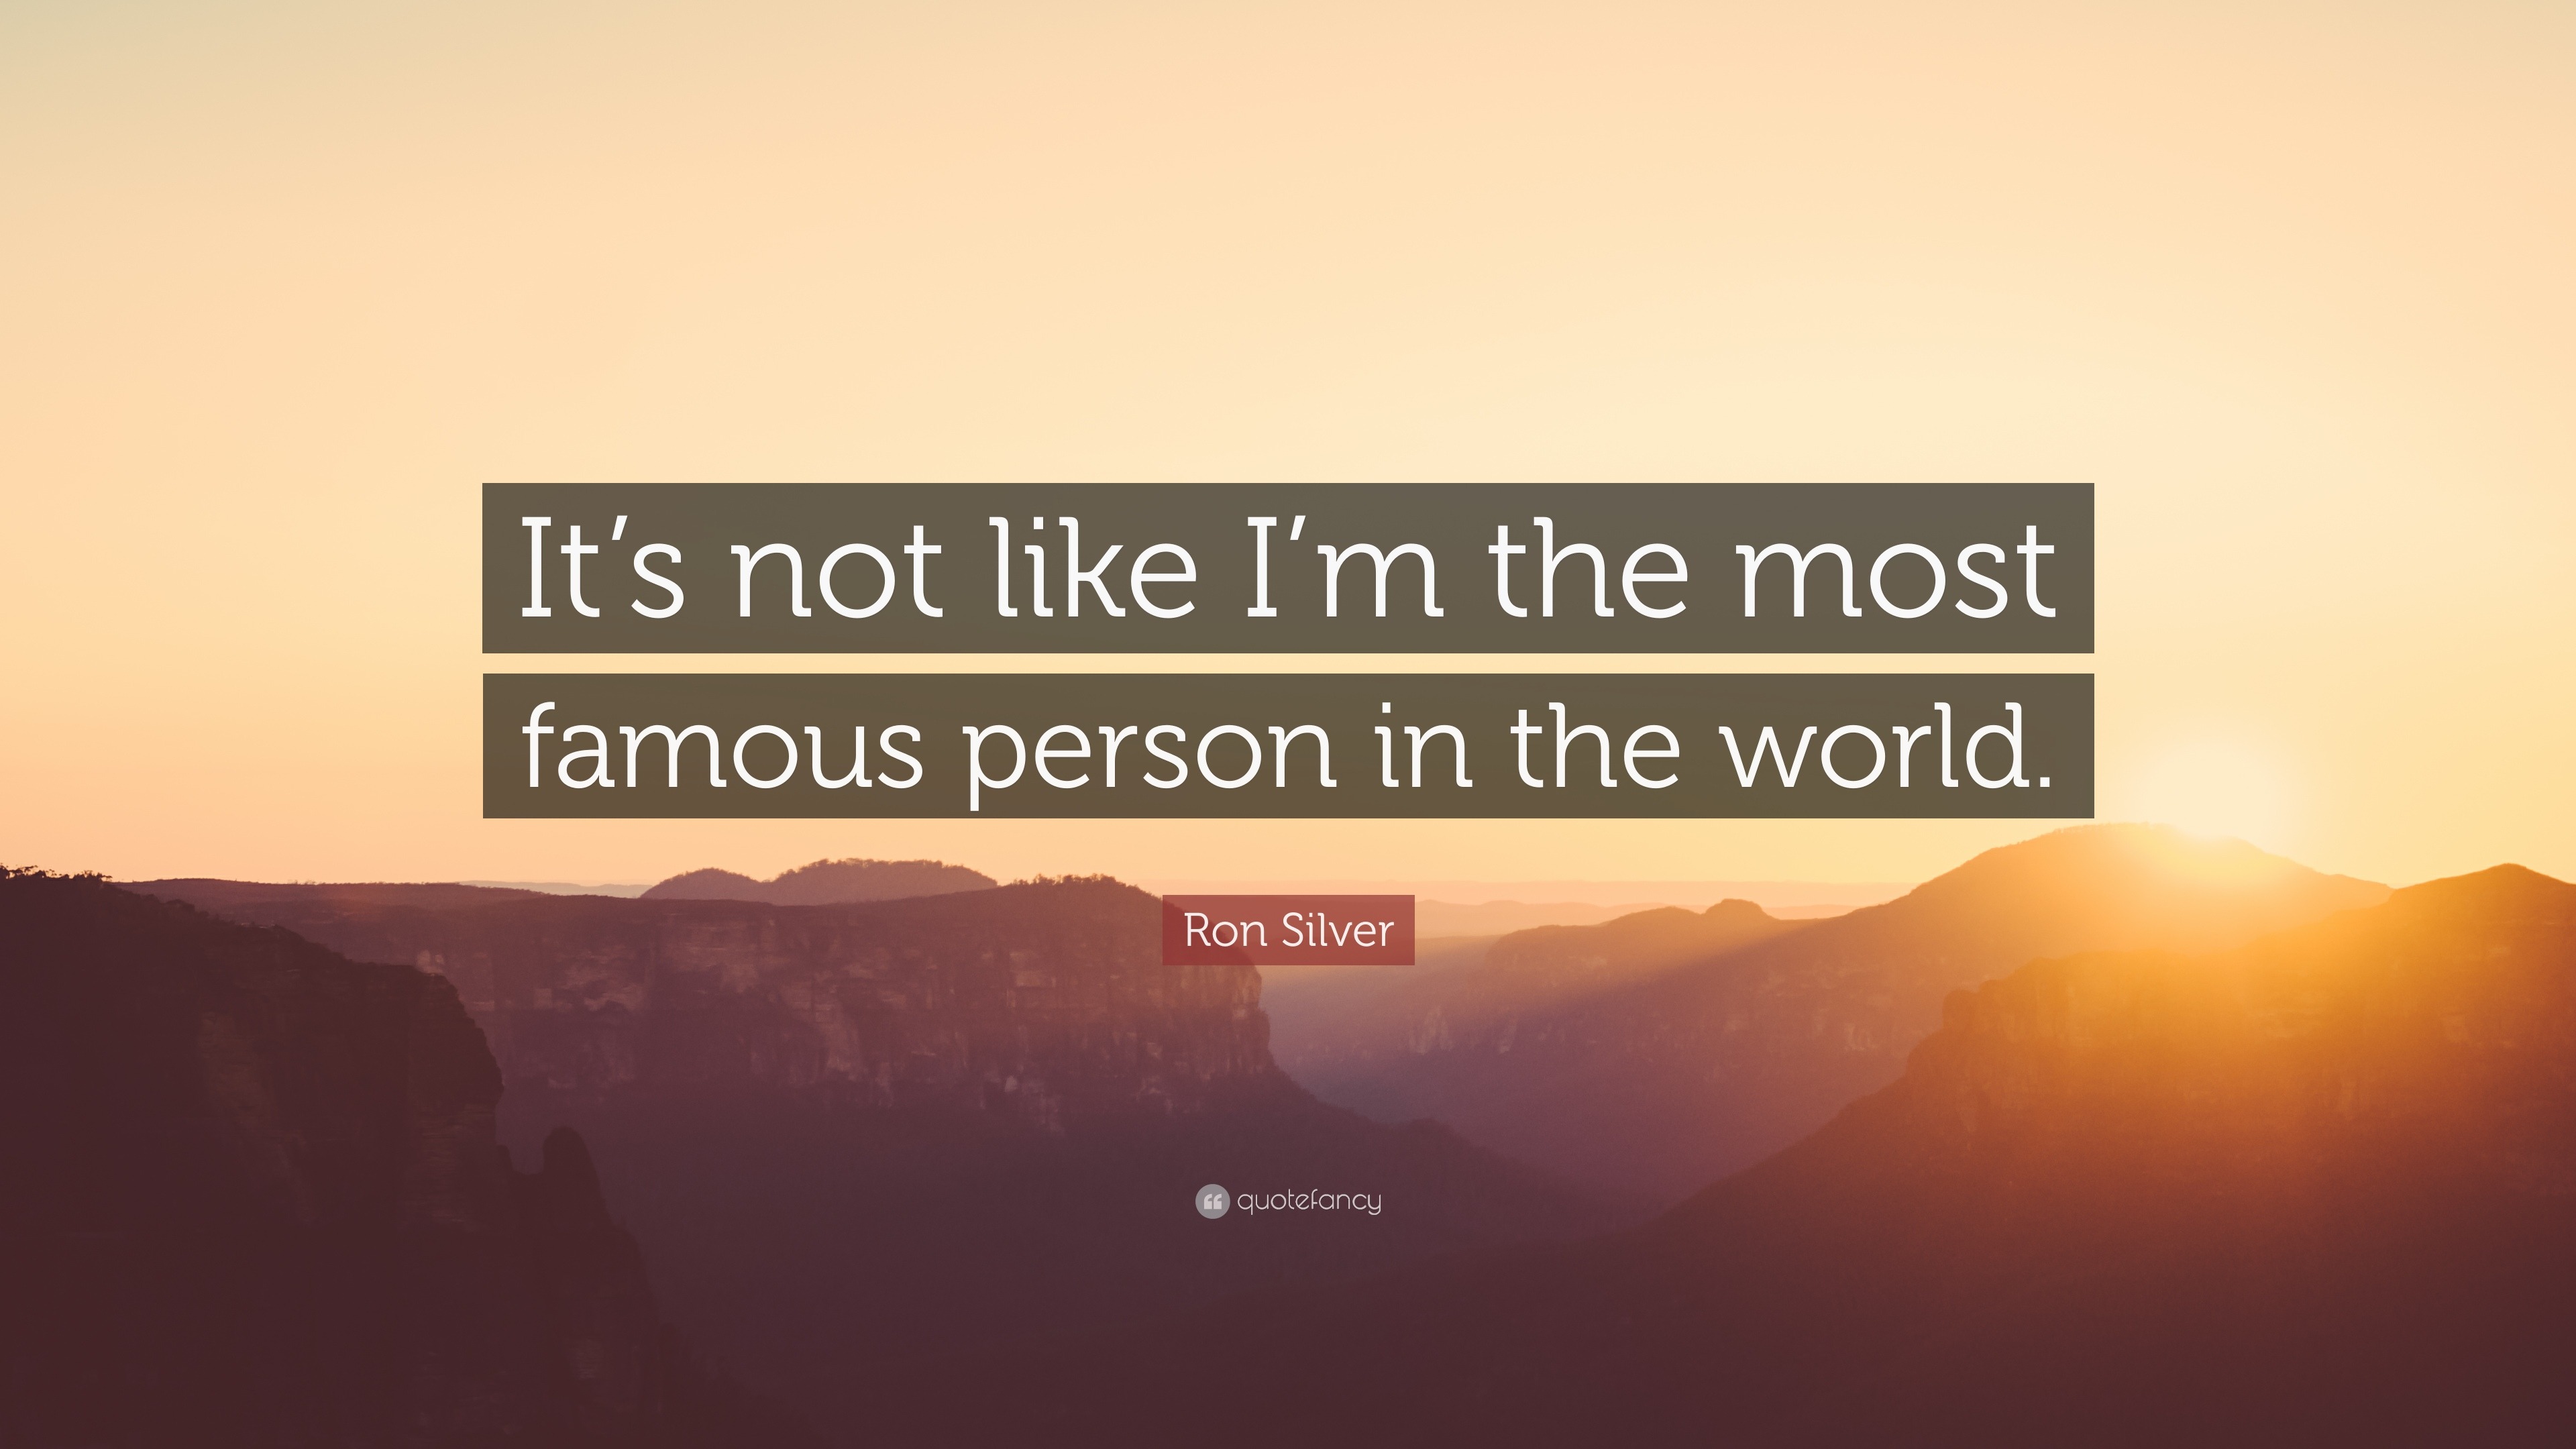 Ron Silver Quote: “It's not like I'm the most famous person in the world.”